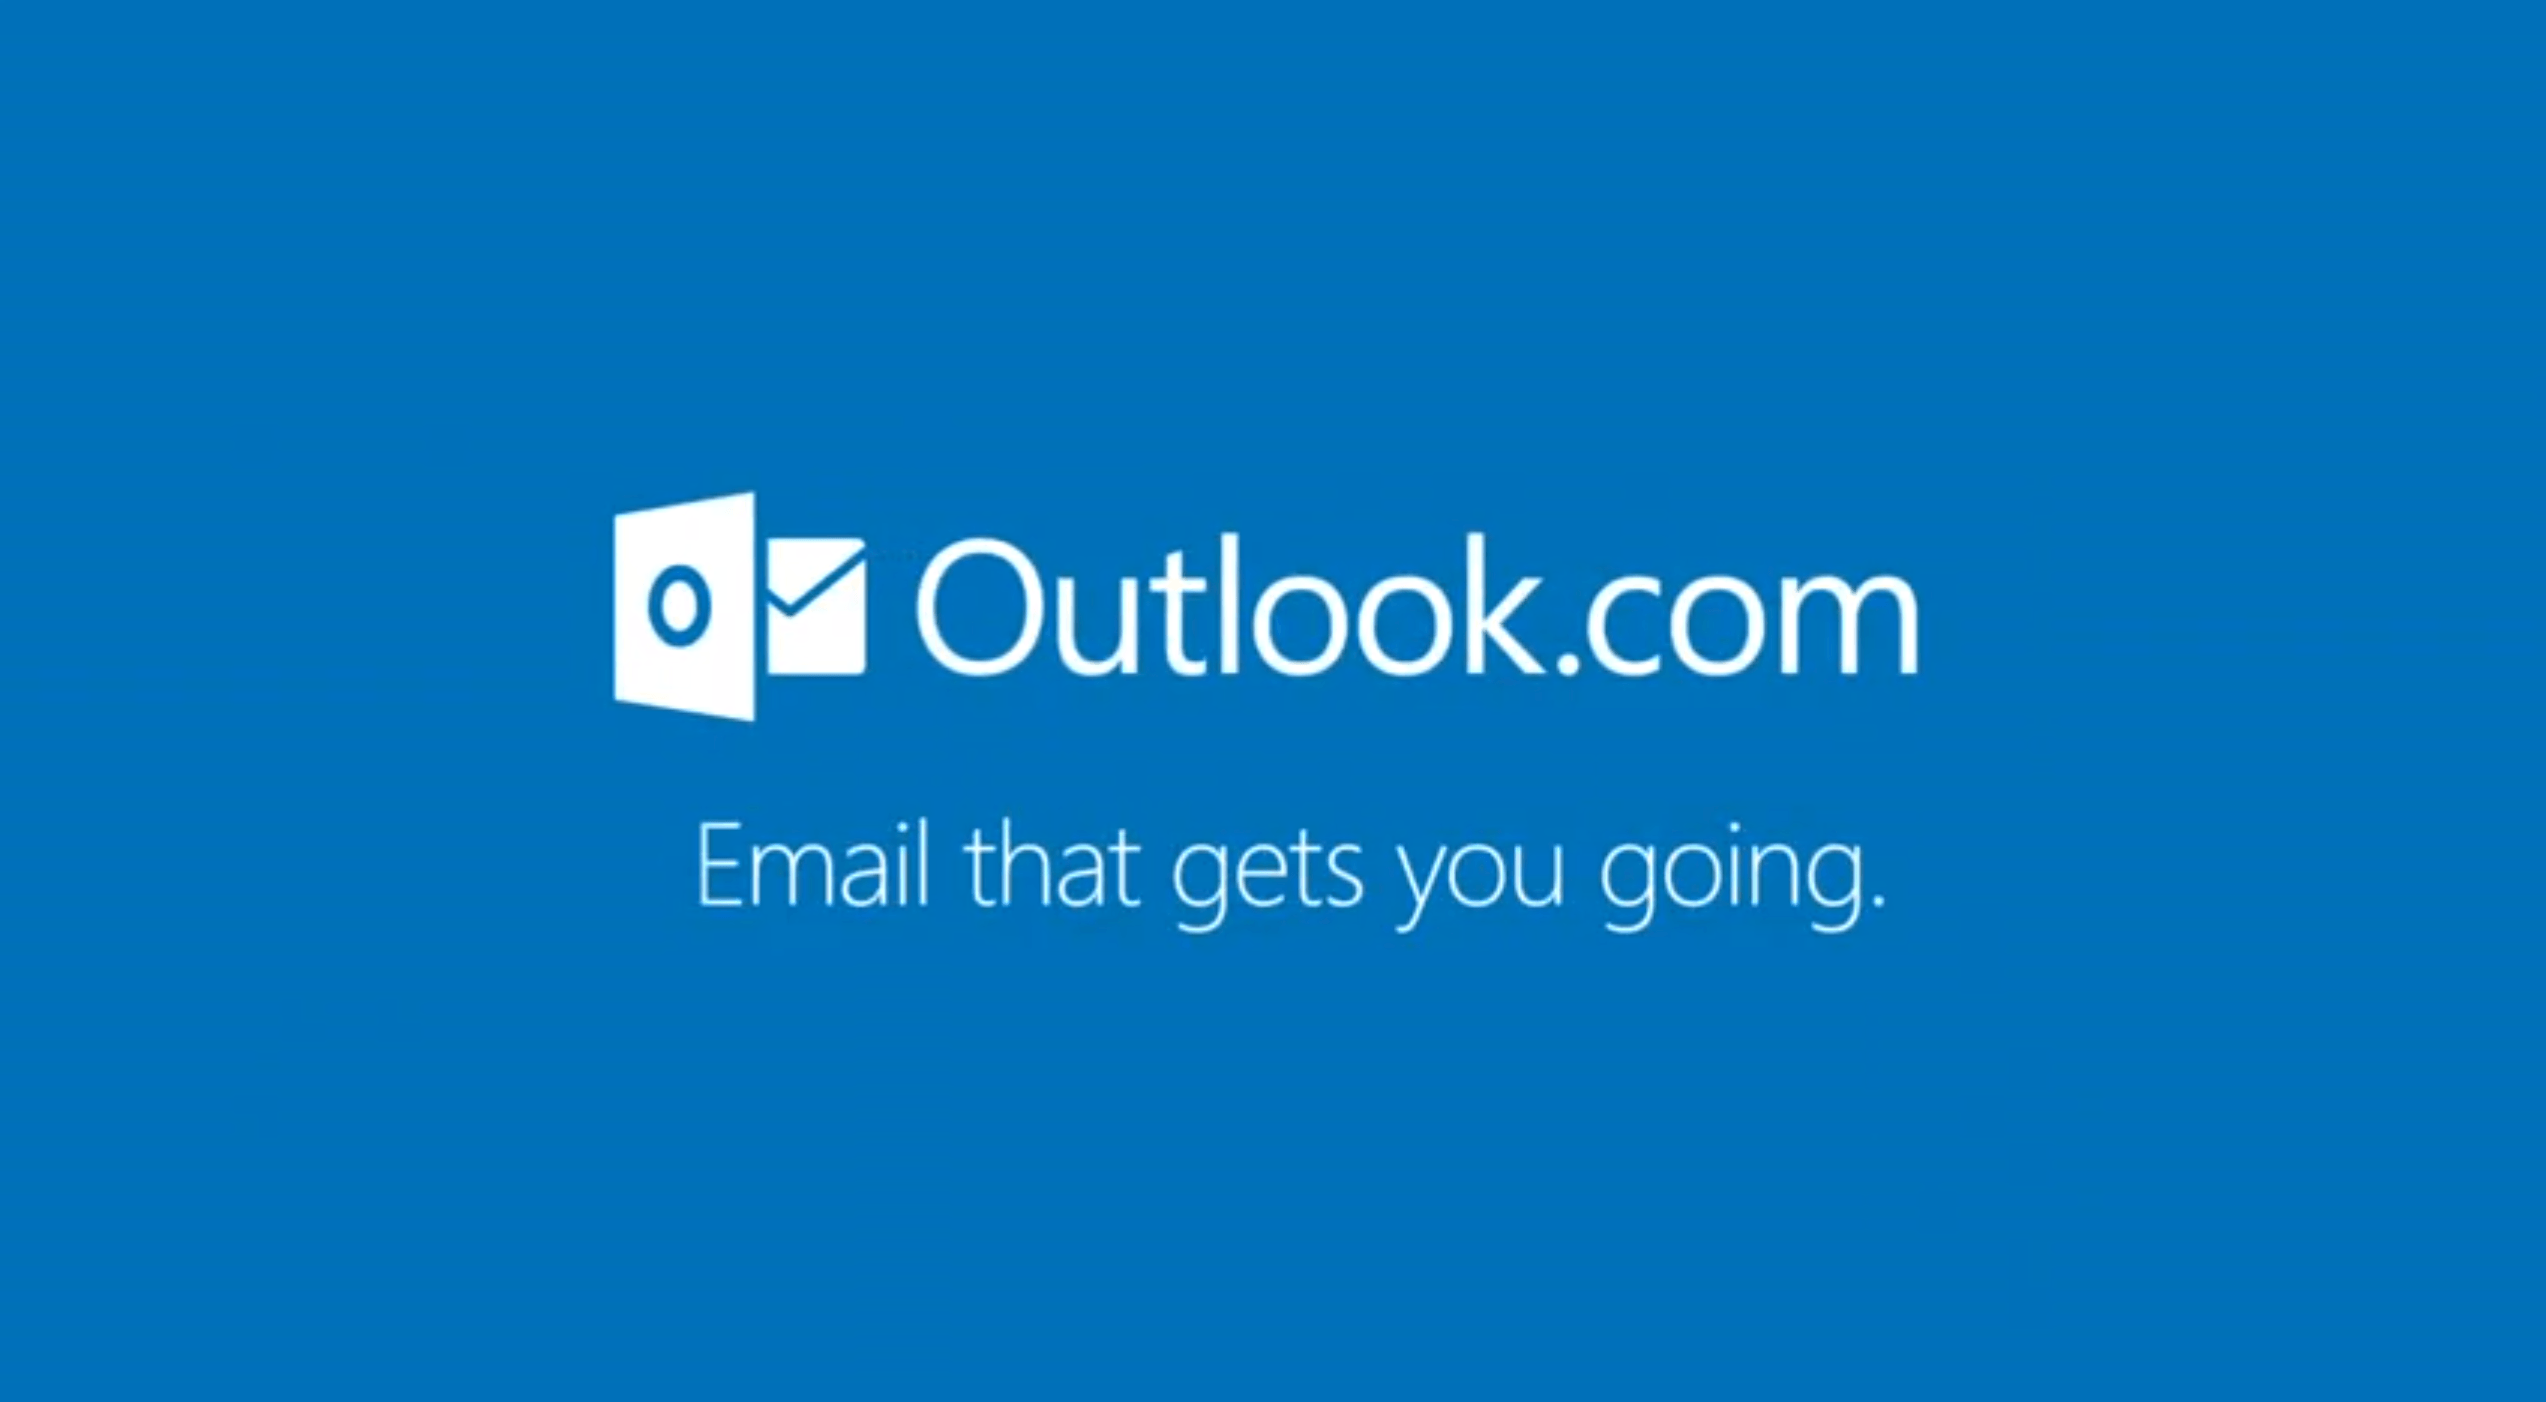 Outlook.com to Get Microsoft Office 365 Inspired Makeover